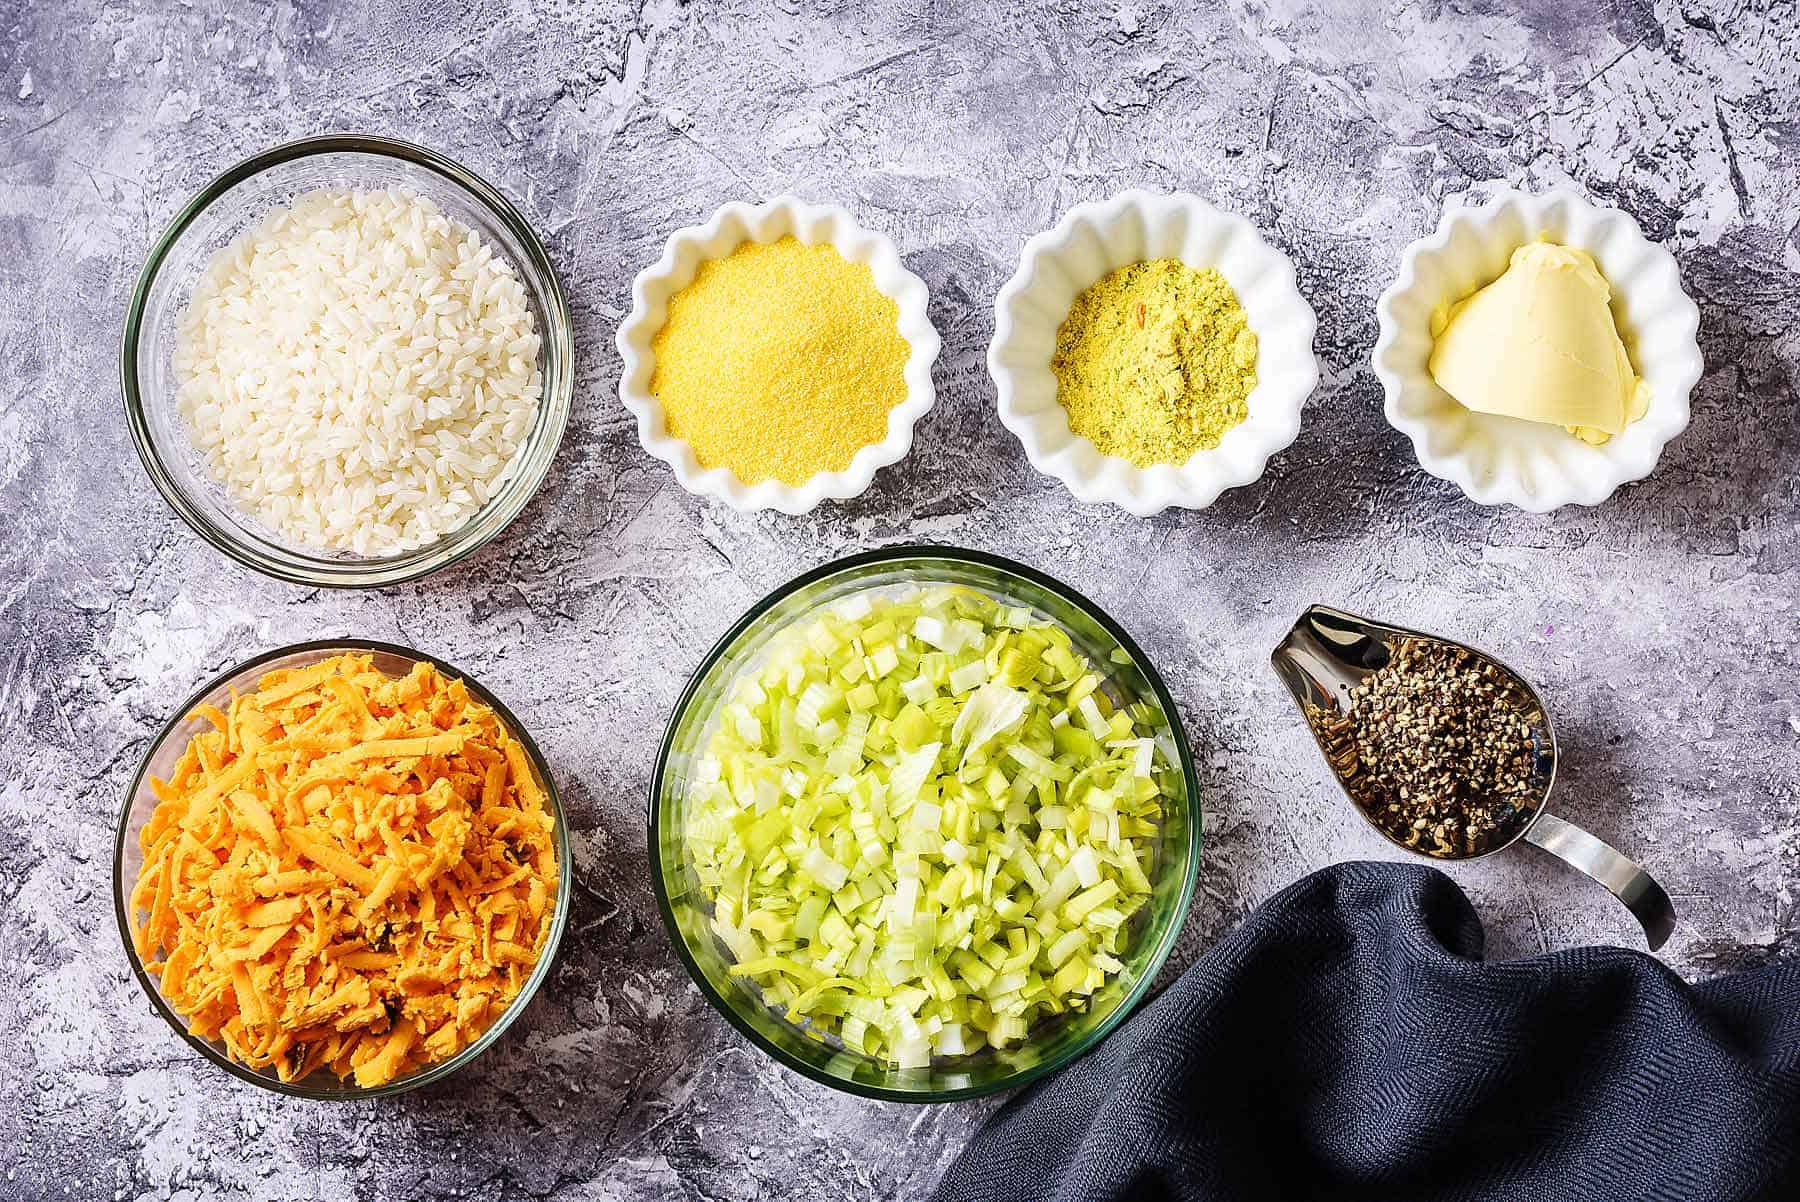 Ingredients for spicy cheesy rice balls